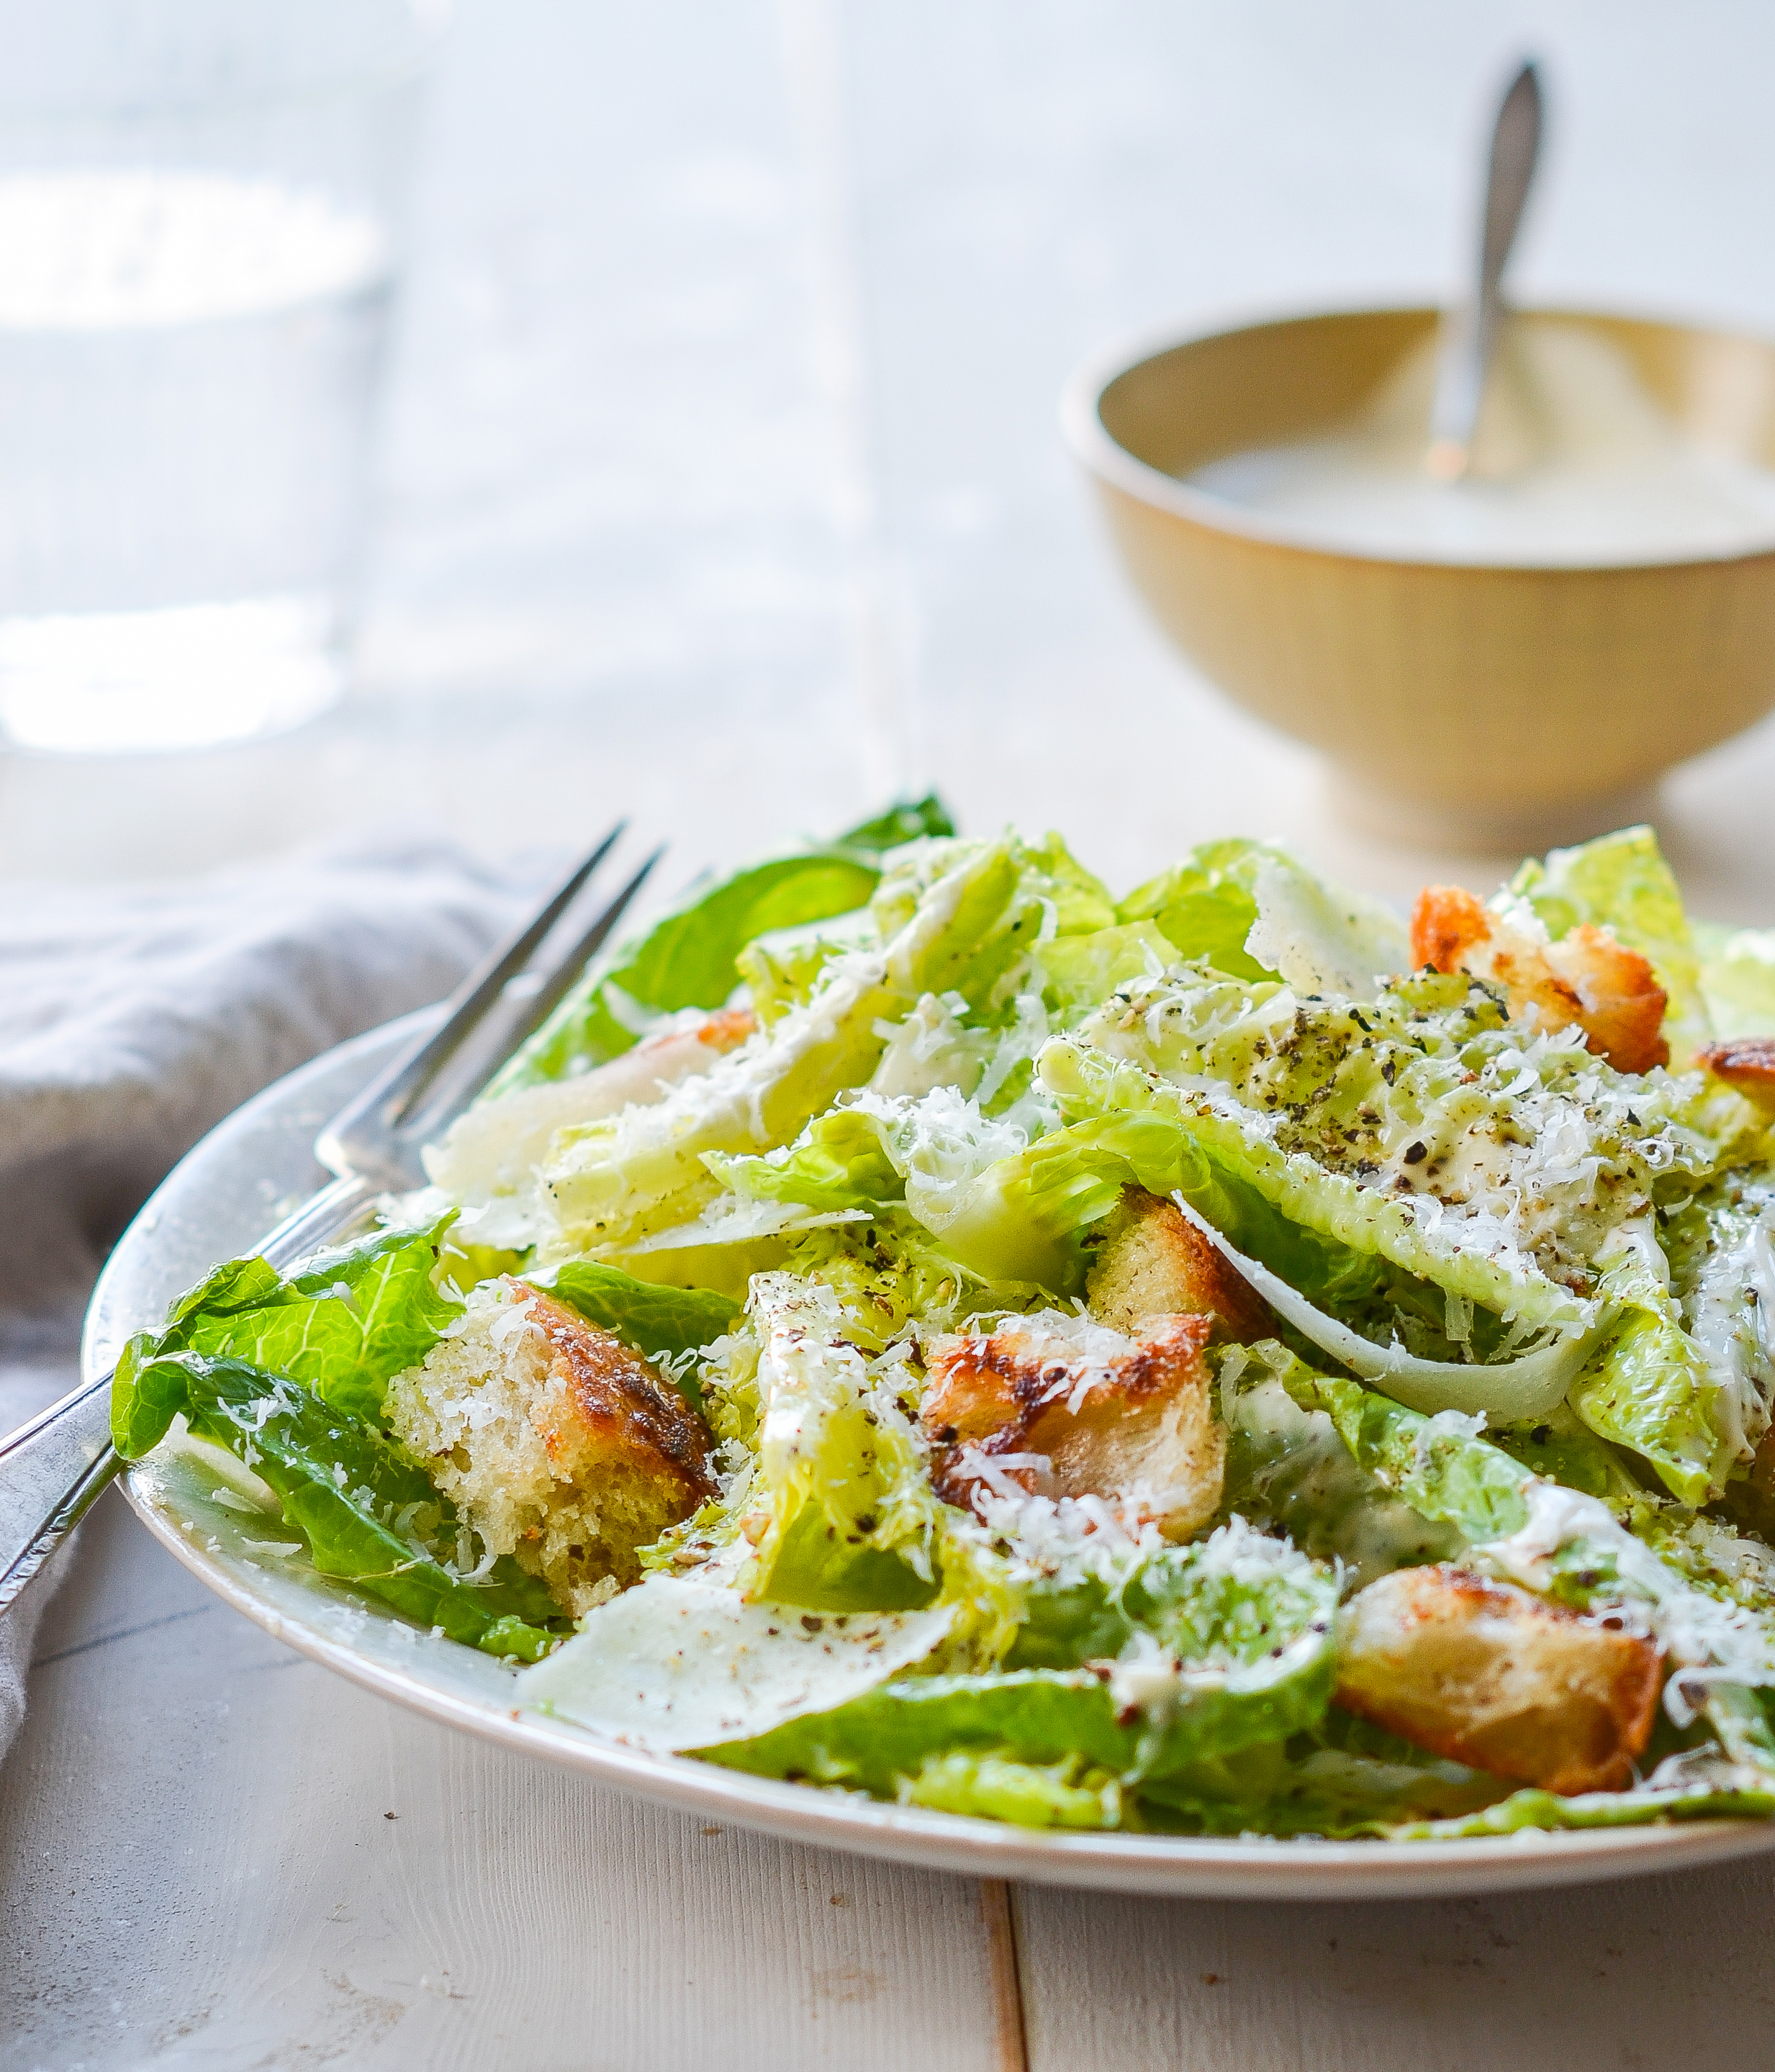 Homemade Caesar Salad Dressing - Once Upon a Chef